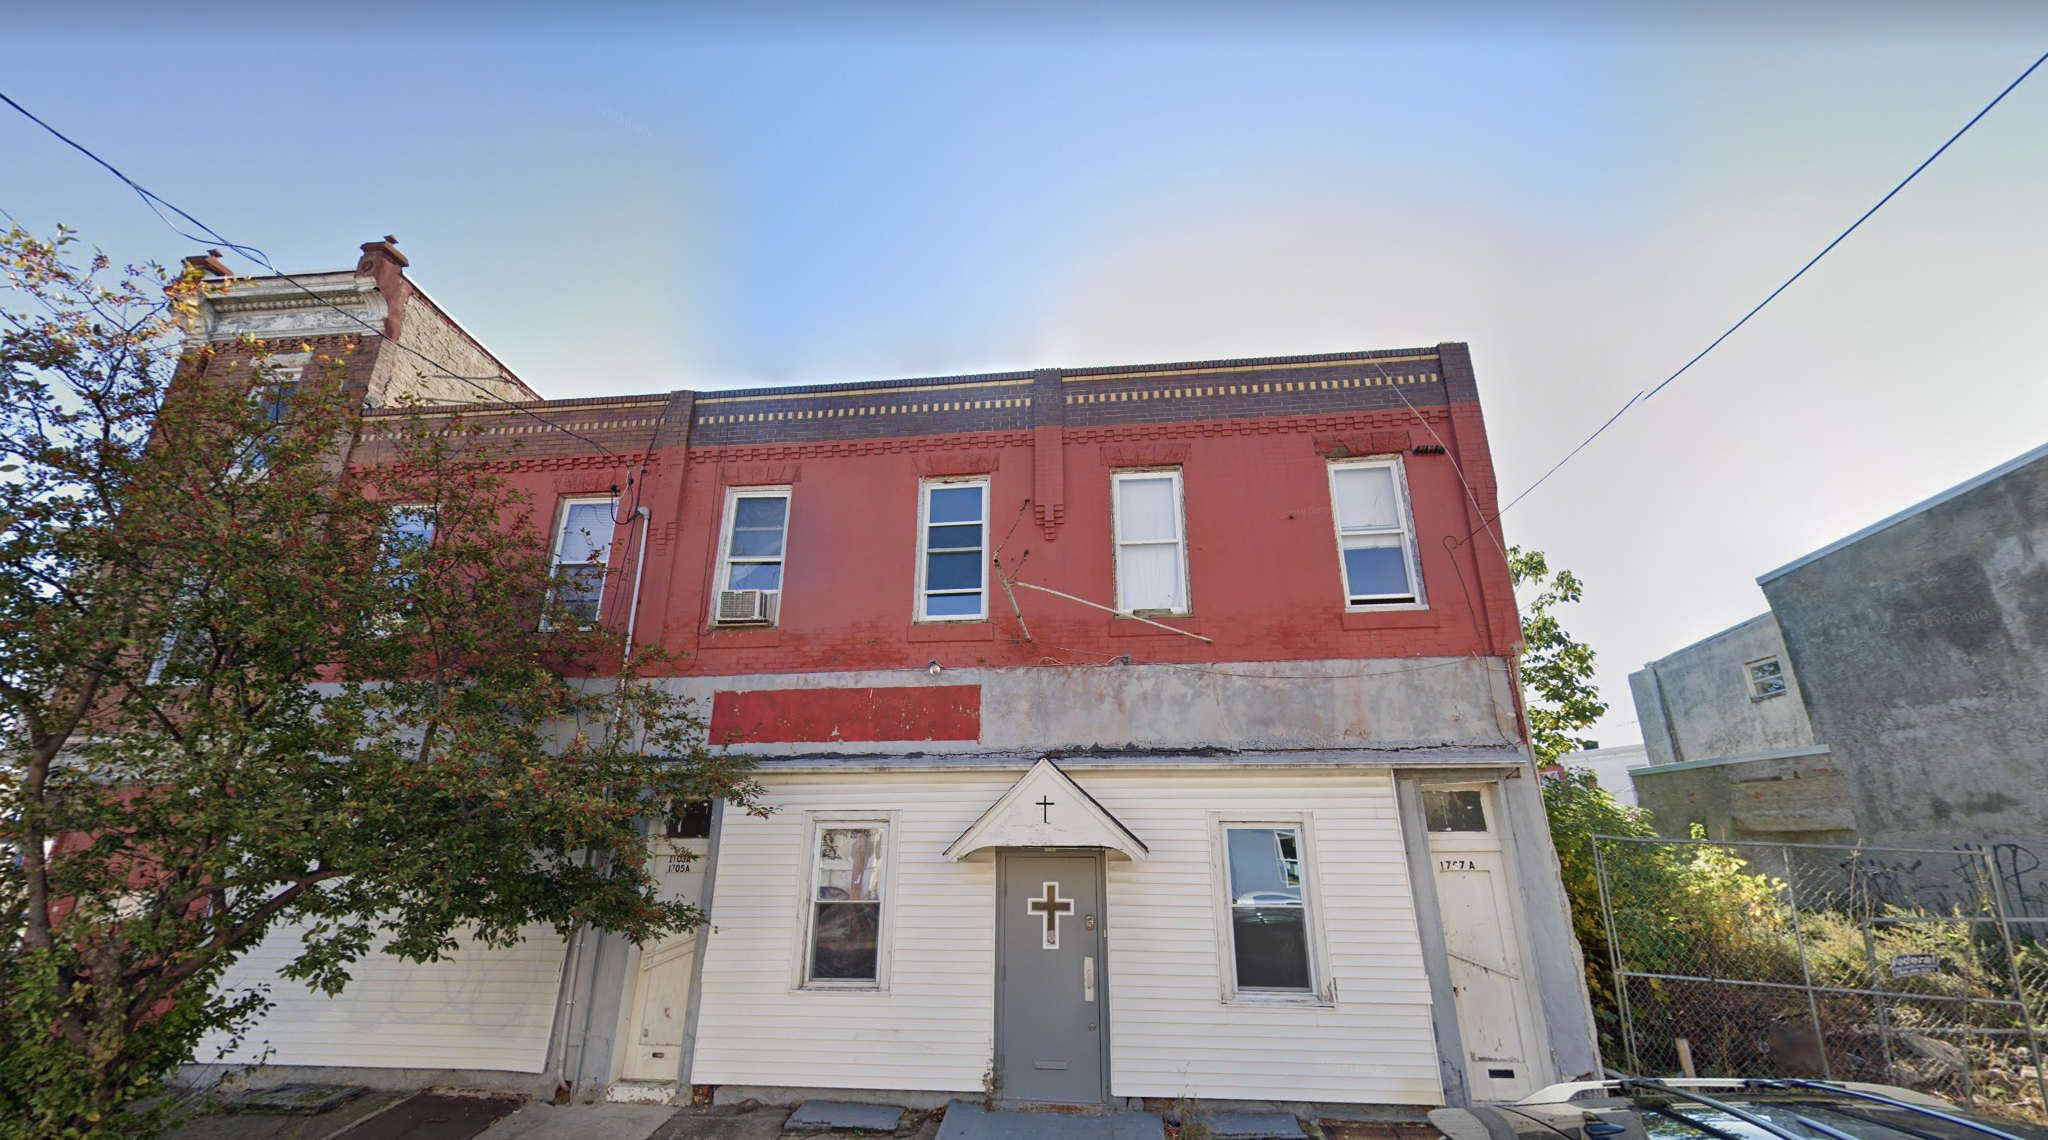 View of 1703-07 Point Breeze Avenue. Credit: Google.